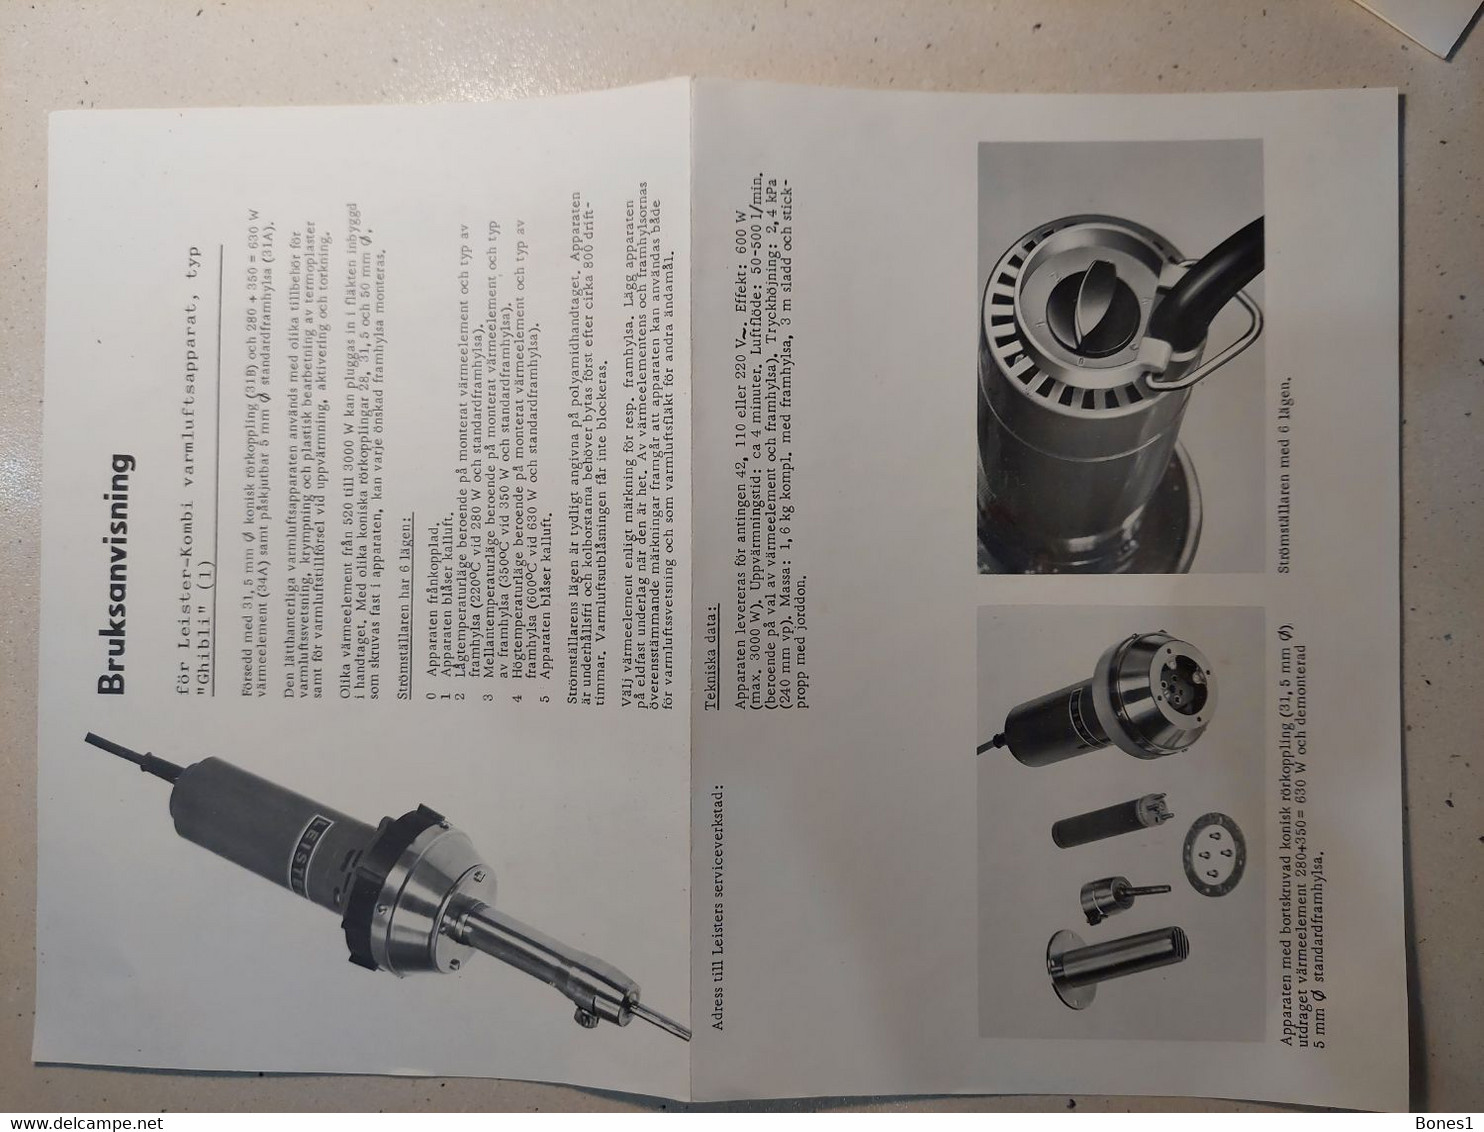 Tools technical plans 1978